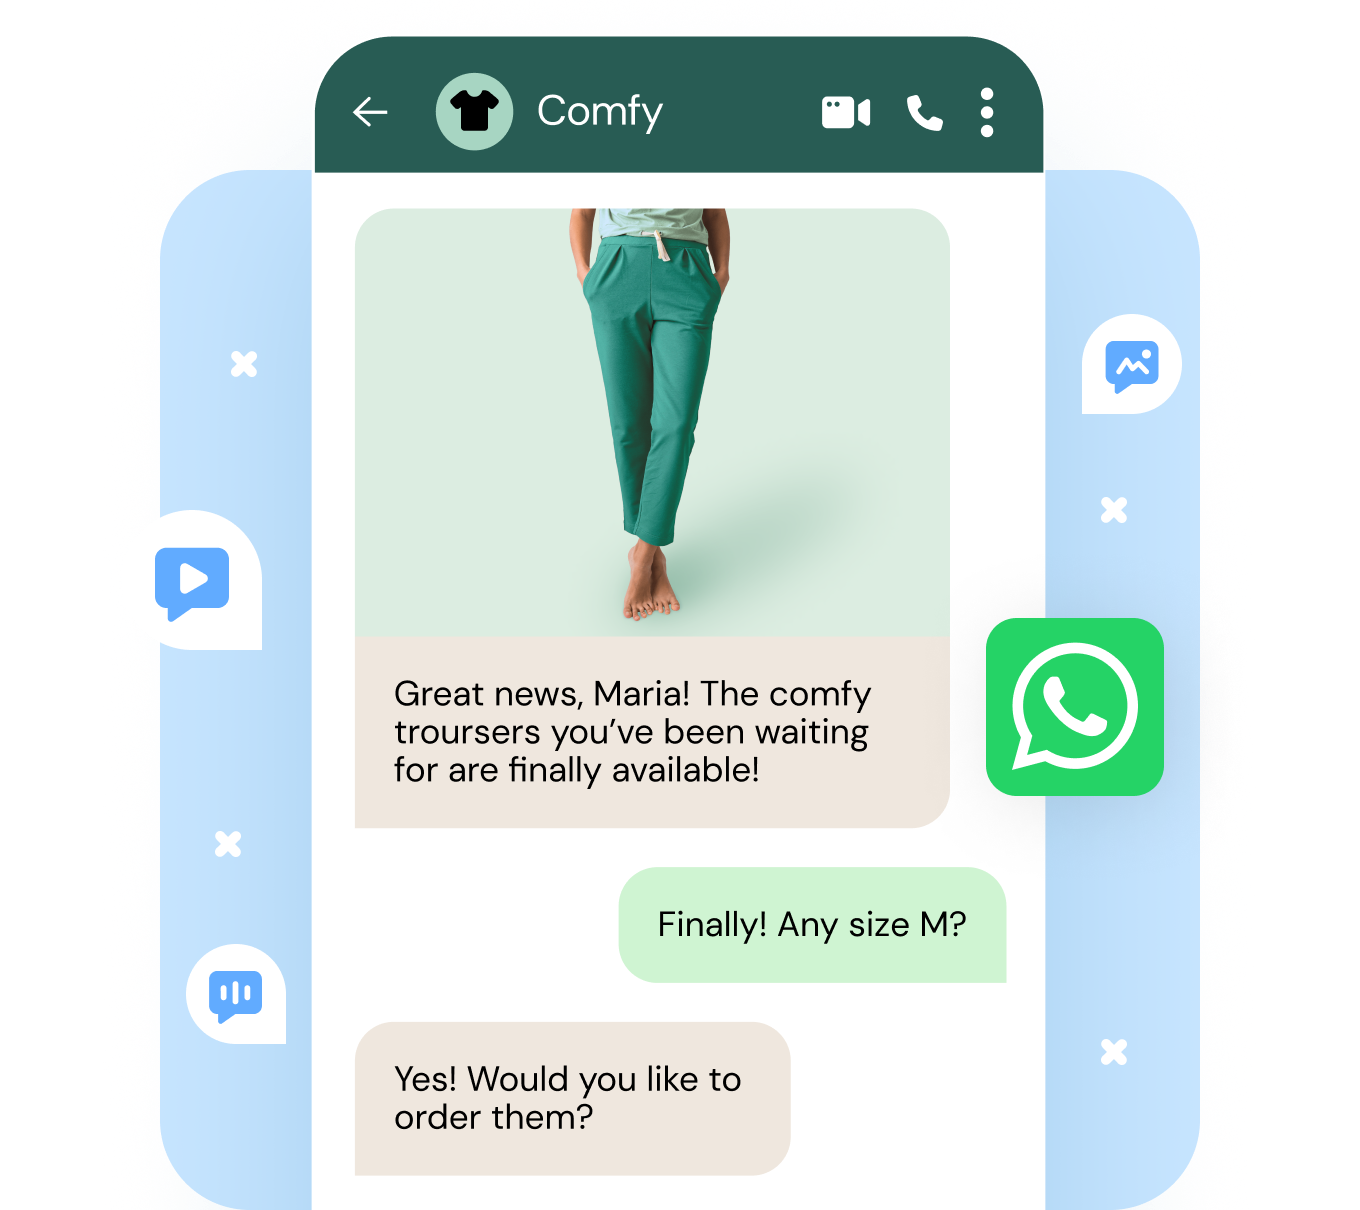 Image for WhatsApp Campaigns